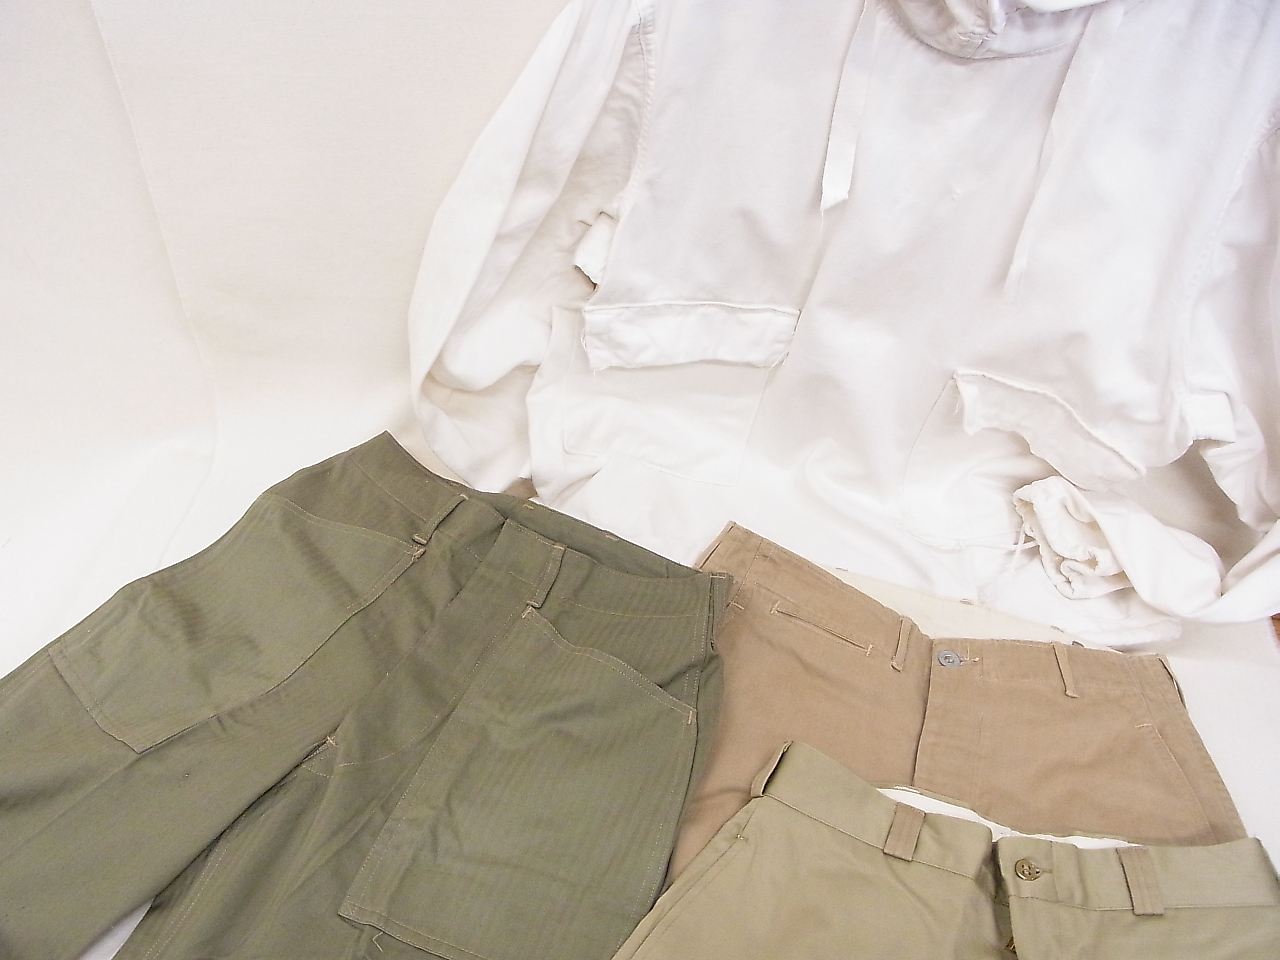 military-clothing-20190710-1